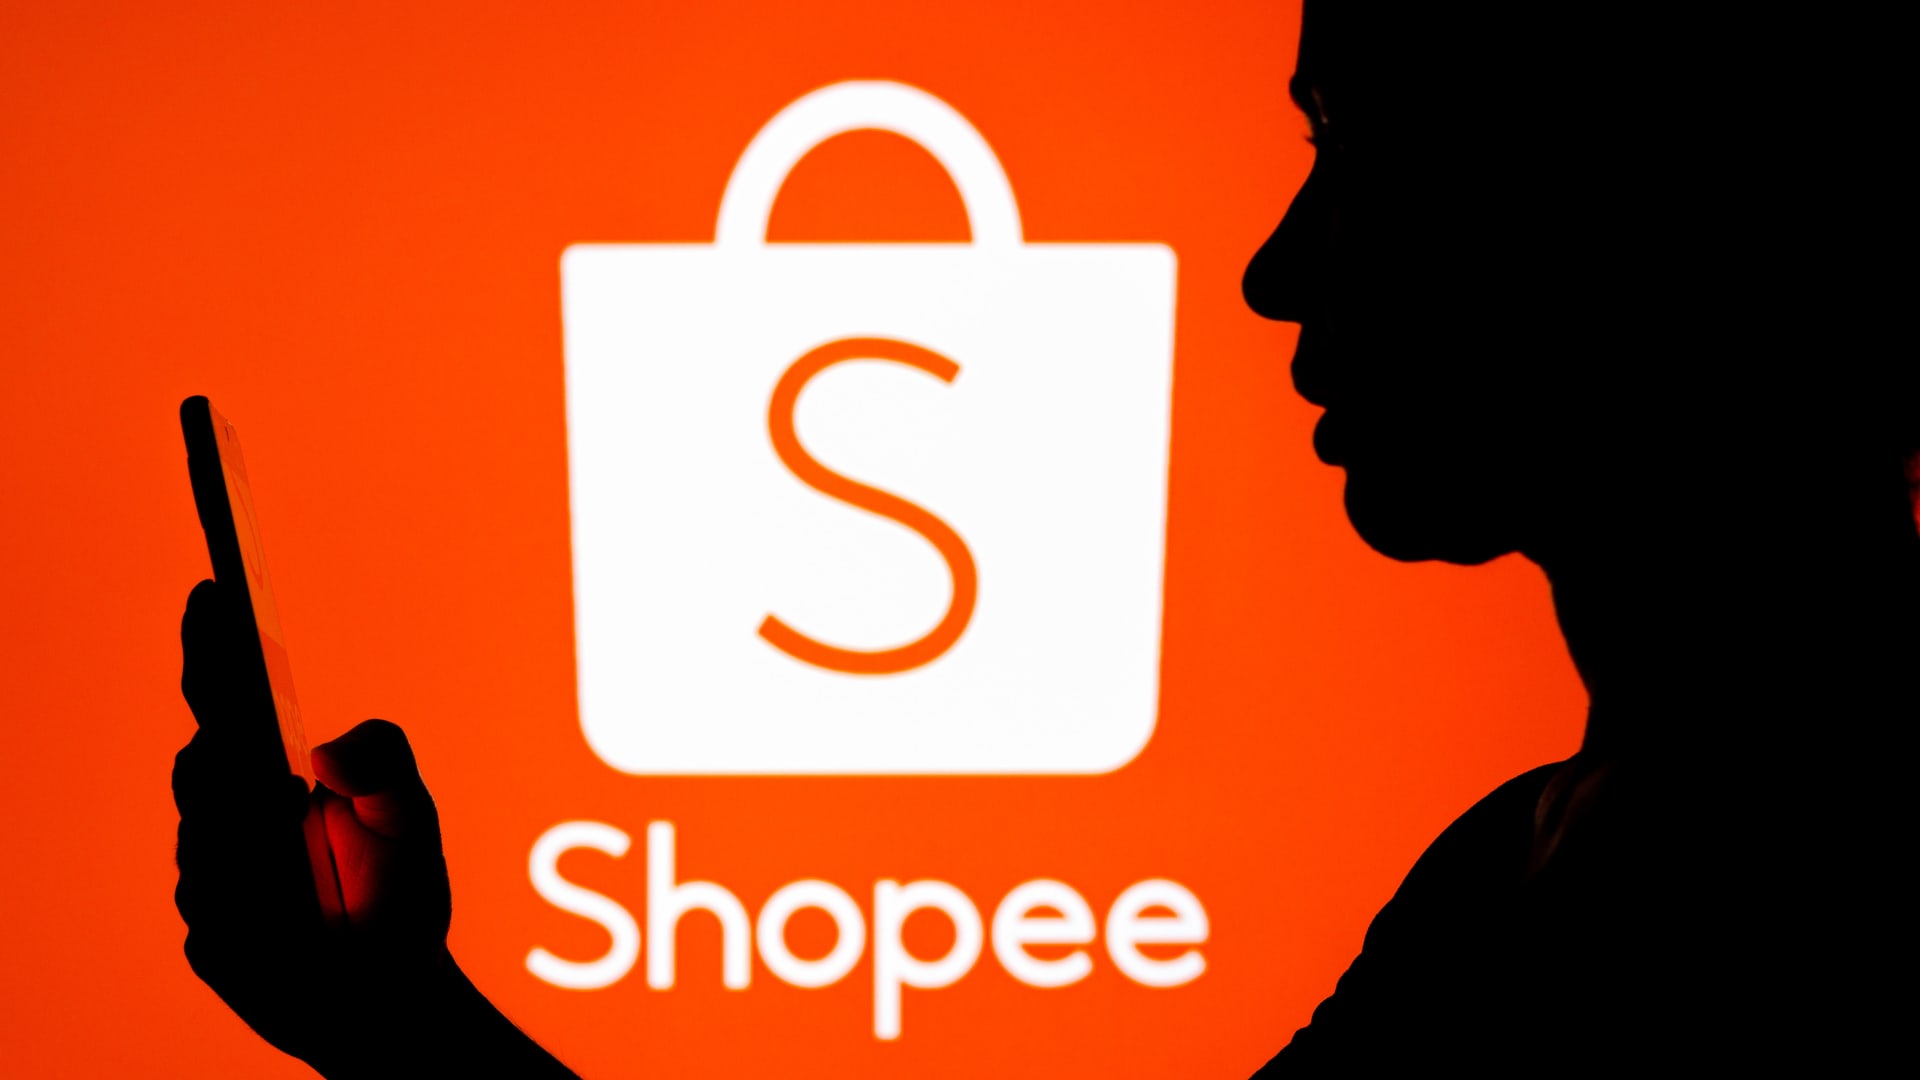 E-commerce firm Shopee agreed to adjust its practices in Indonesia after watchdog says it violated competition law